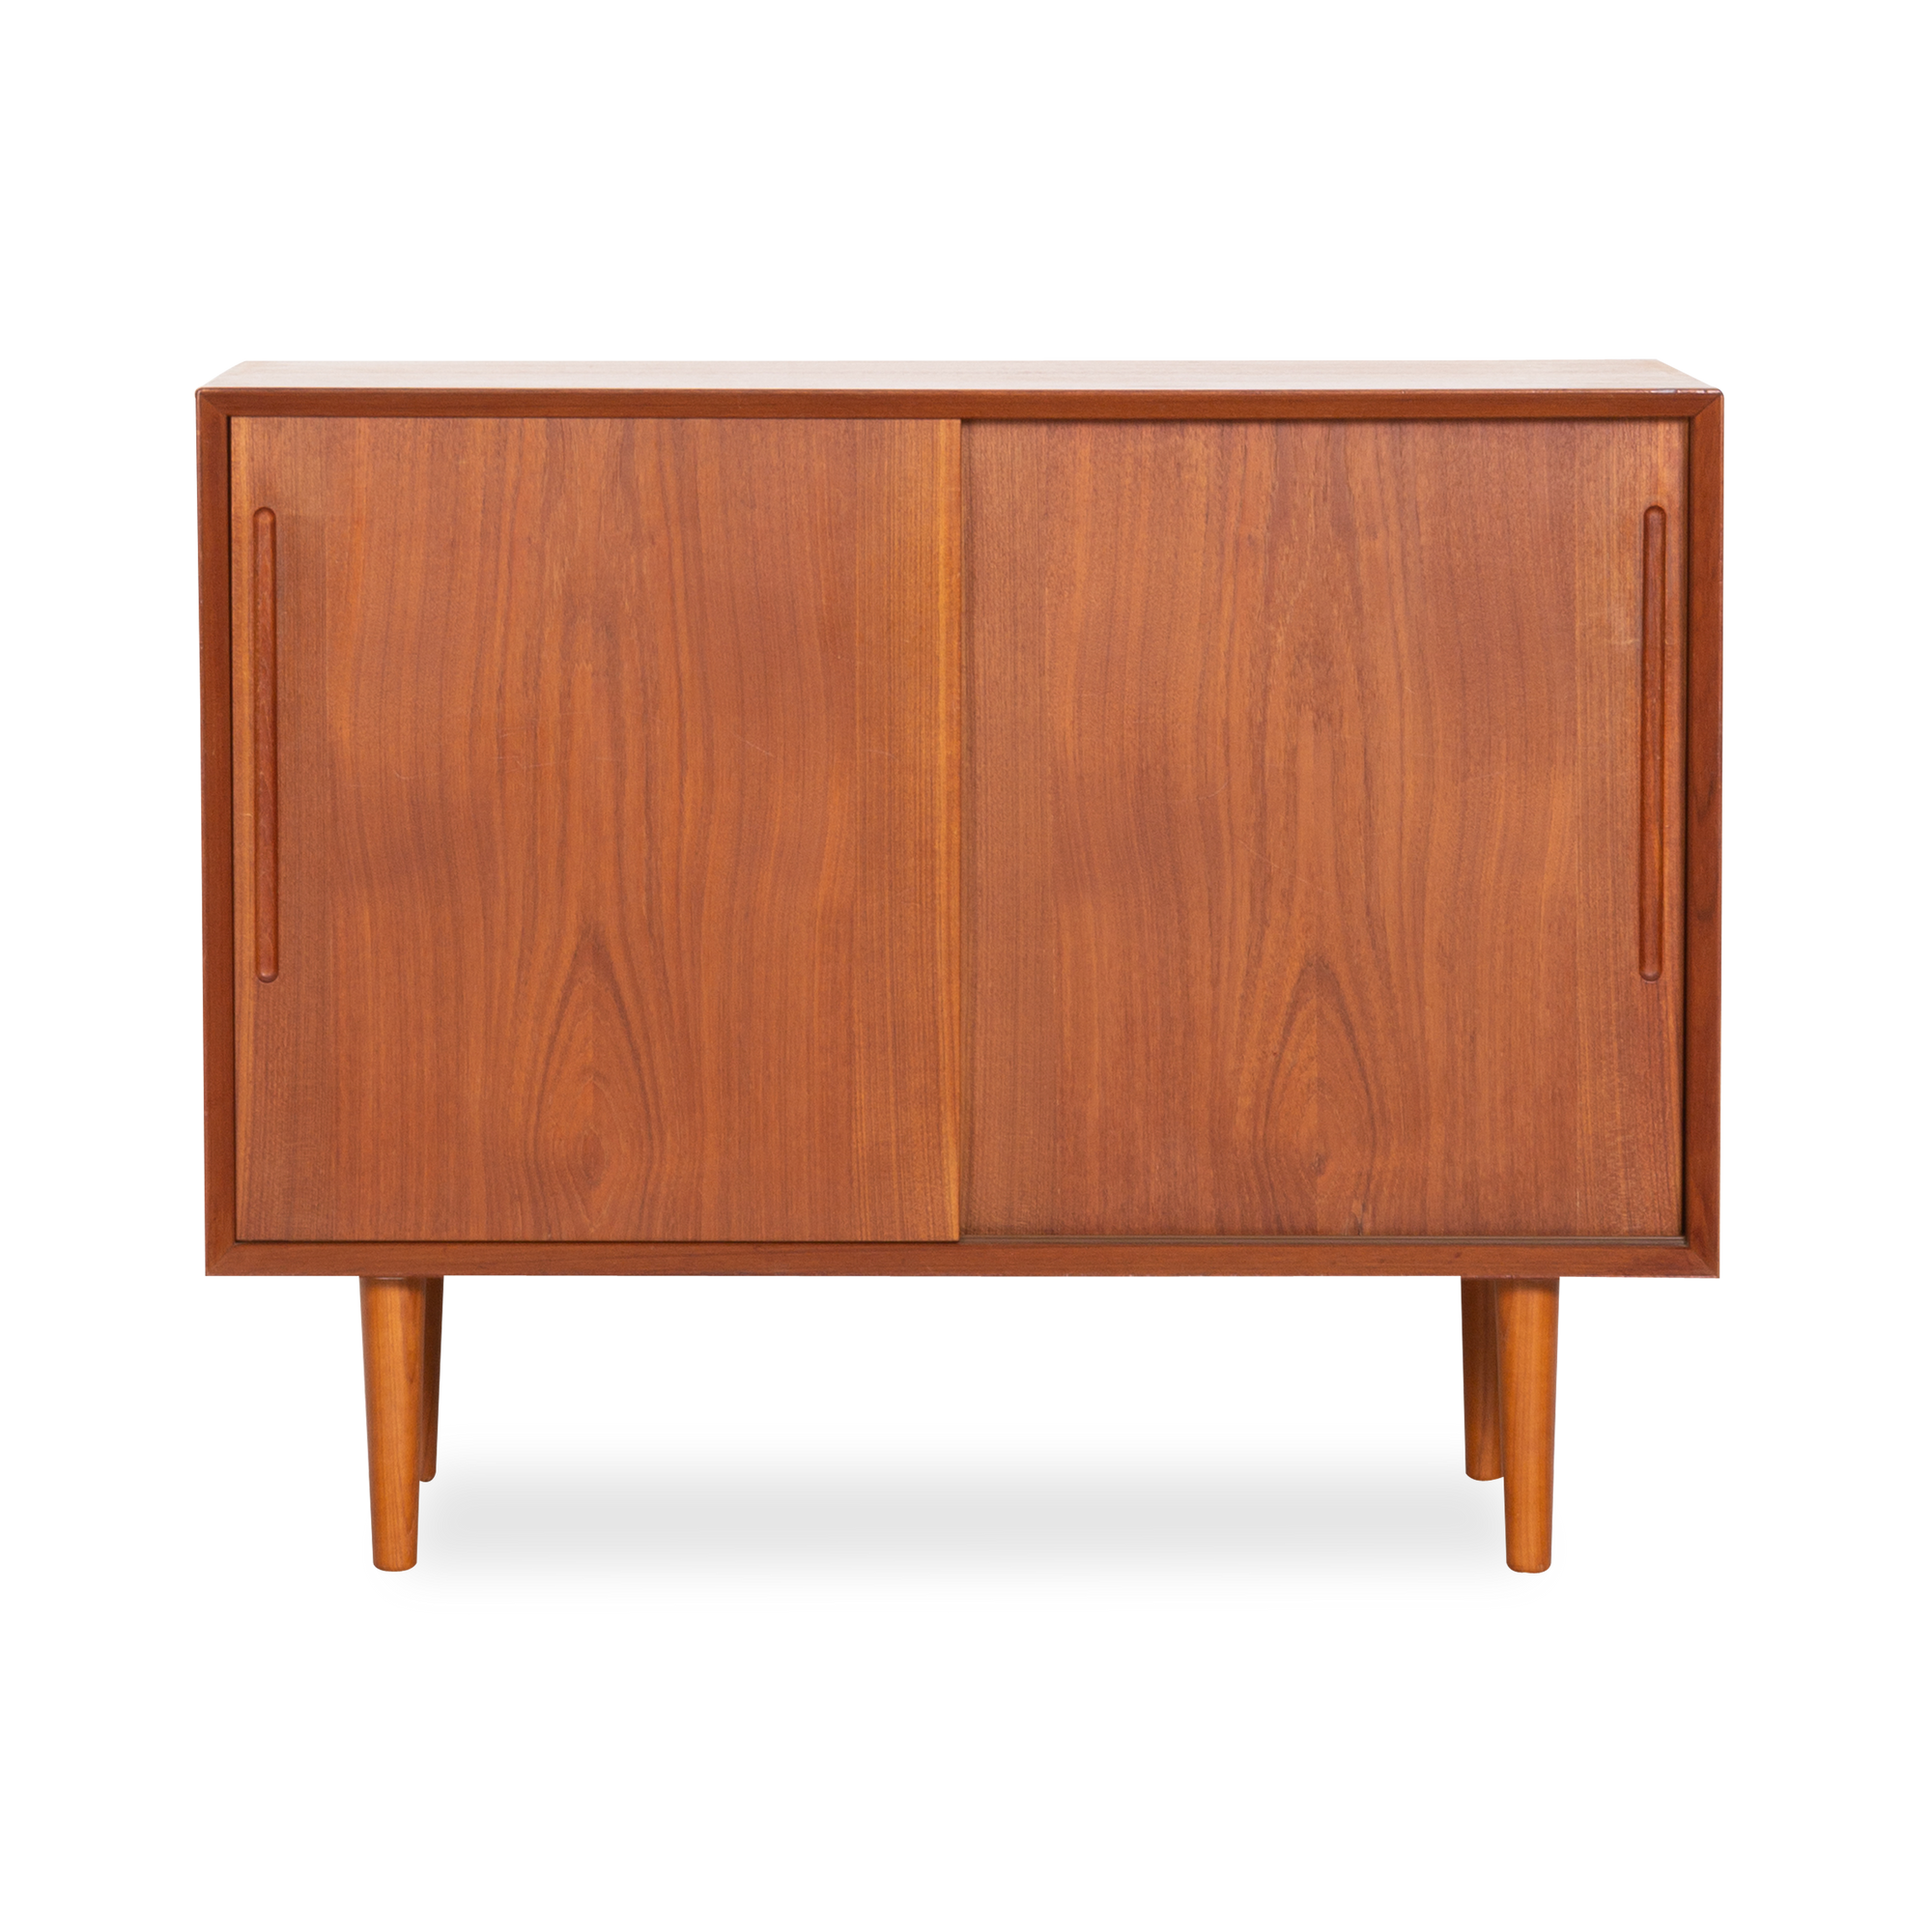 Displaying an elegantly aged teak finish, this vintage cabinet was produced in Denmark, circa 1970s.